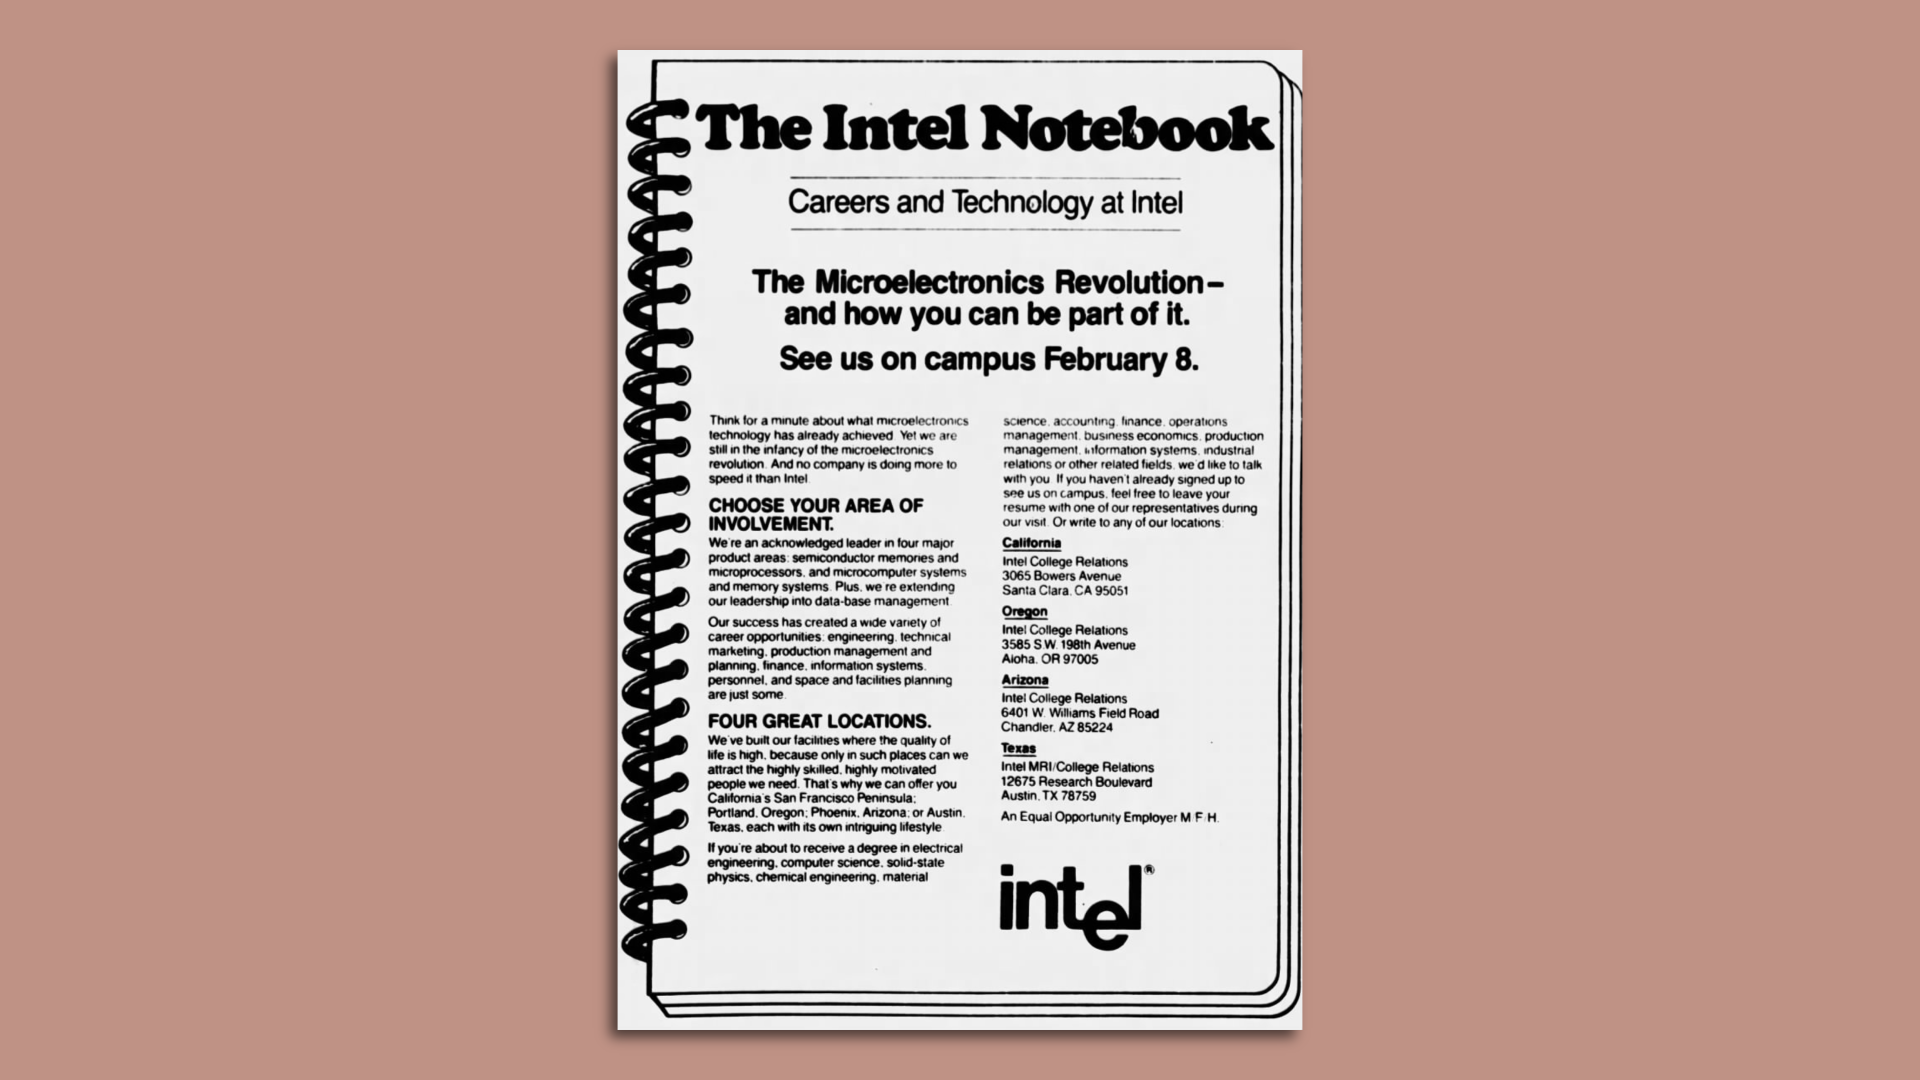 An Intel advertisement from the Jan. 31, 1980 edition of the (Salt Lake City) Daily Utah Chronicle with a headline of "The Intel Notebook"